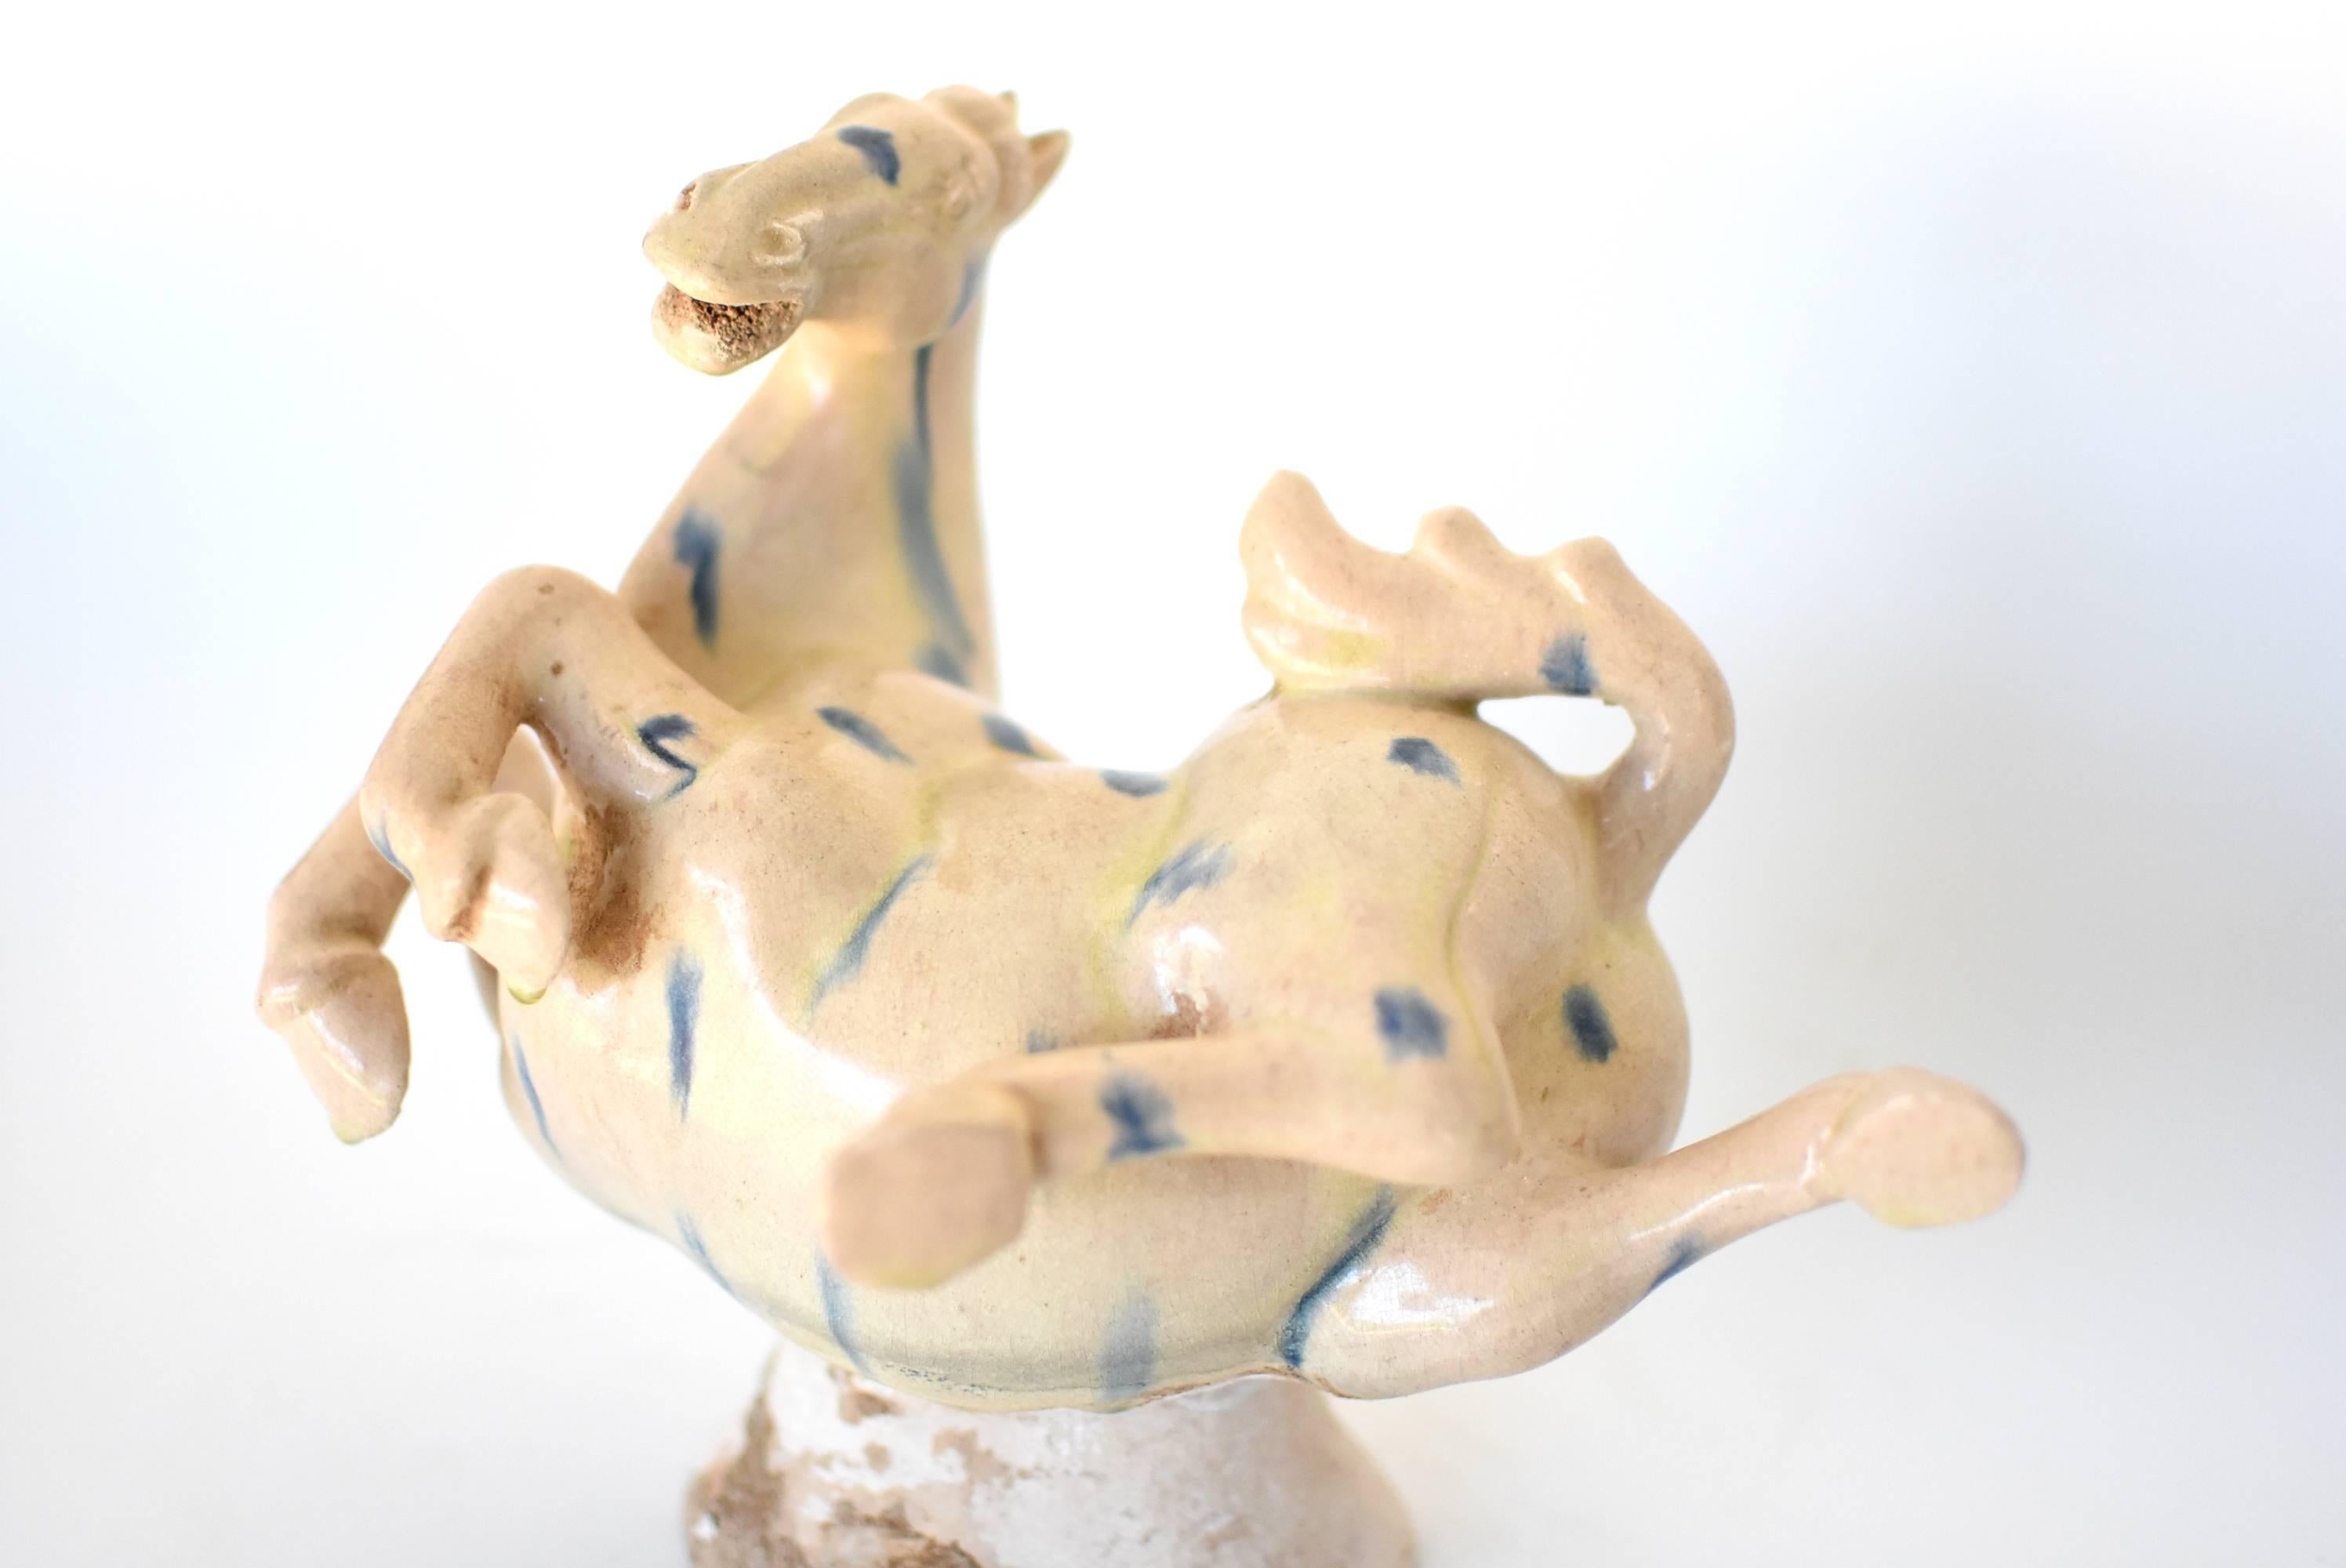 Set of 4 Large Pottery Horses, Chinese Terracotta with Blue Streaks 3